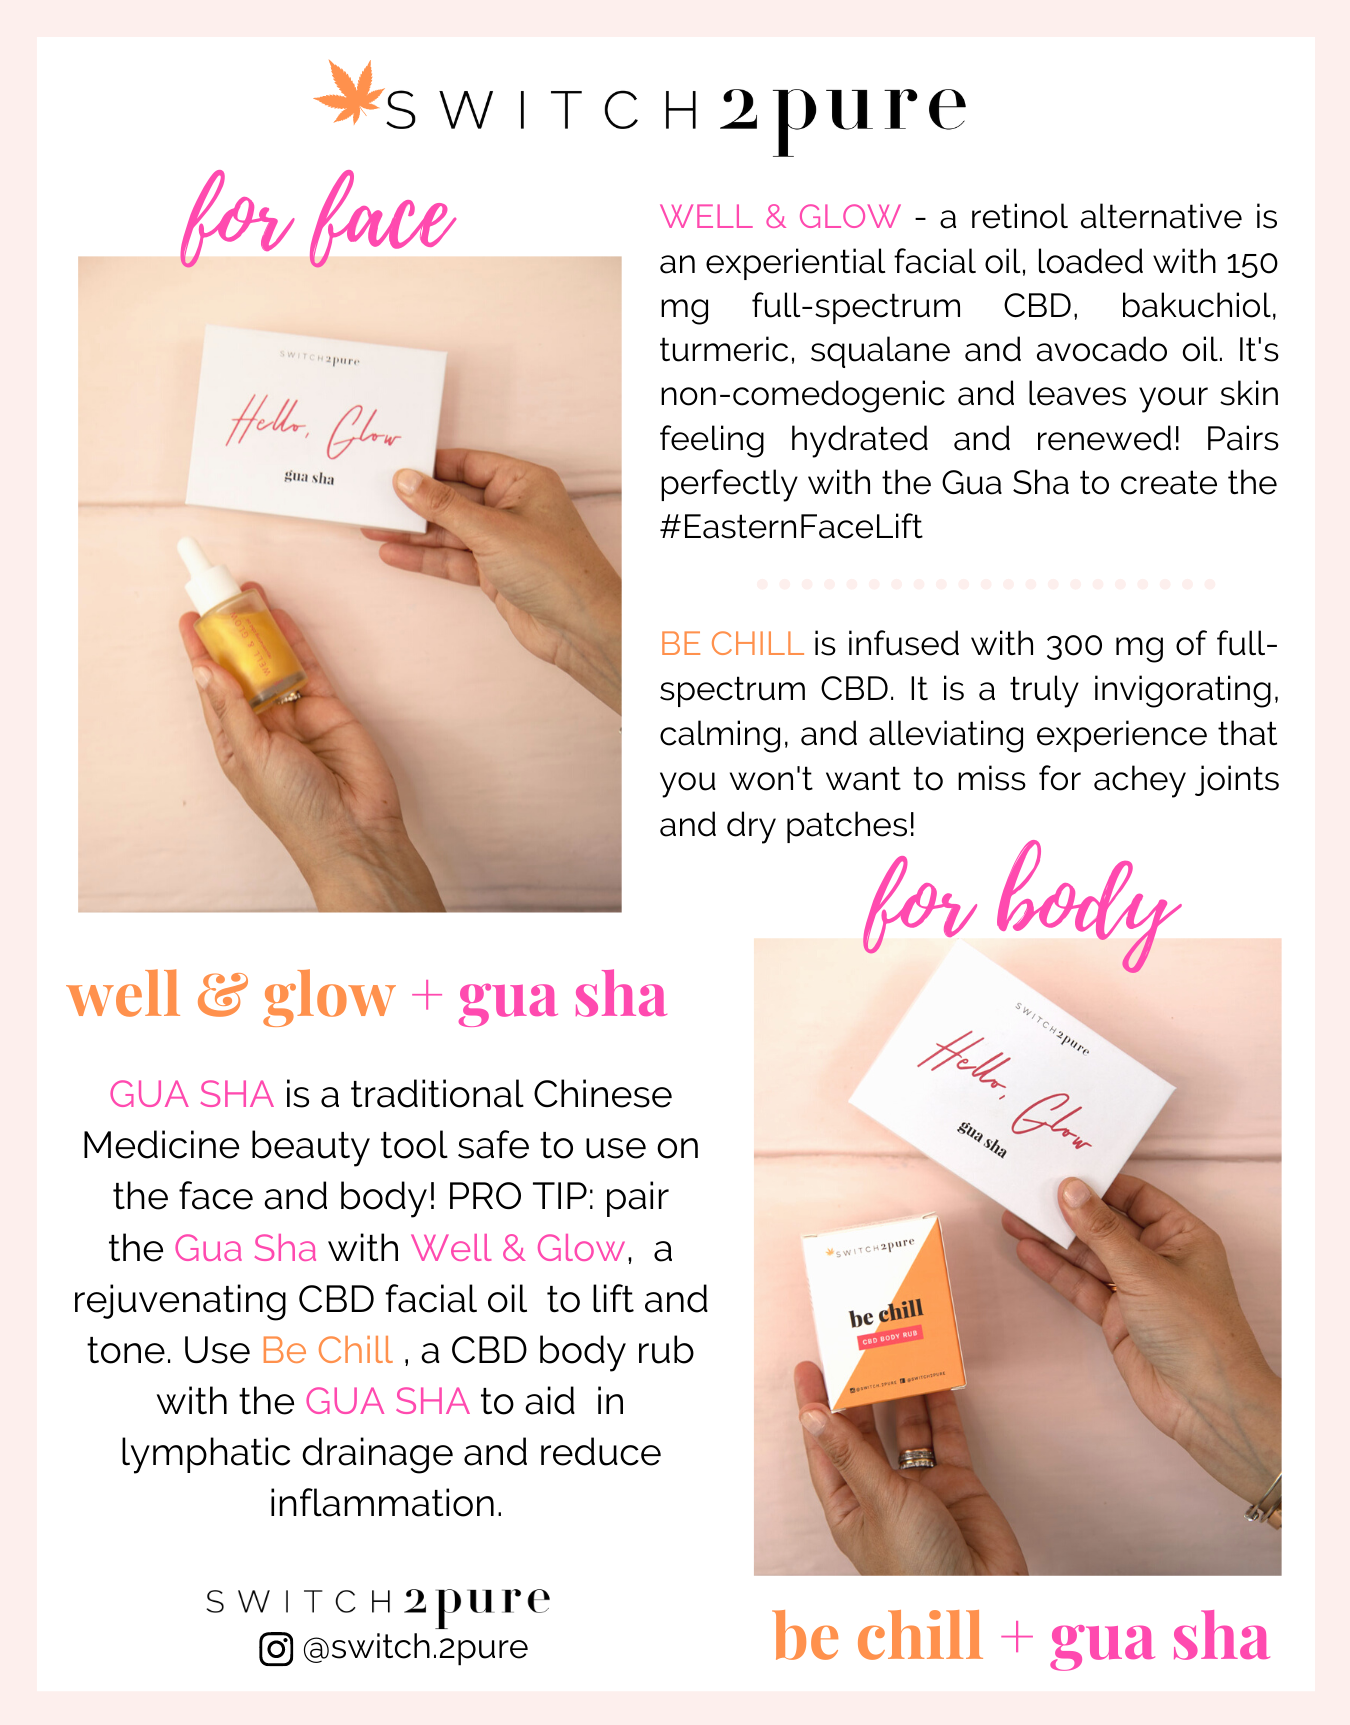 How to use your Gua Sha with Switch2pure well & glow rejuvenating facial oil and be chill body rub